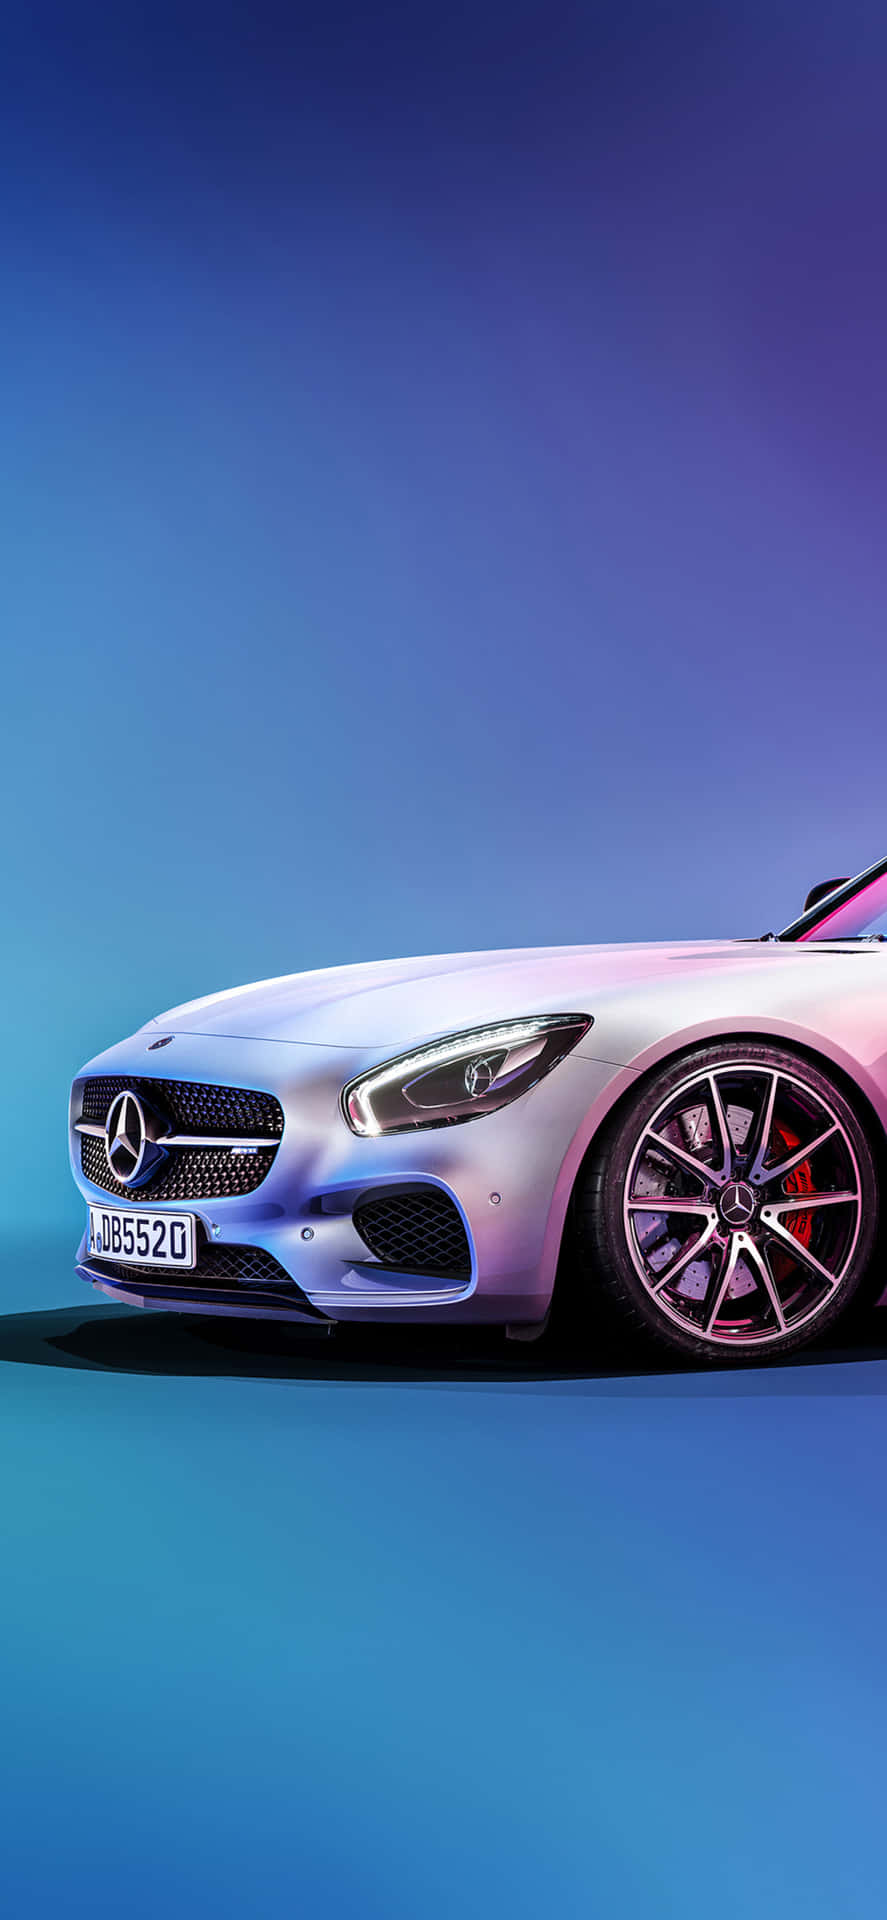 White With Blue Backdrop Iphone Xs Mercedes Amg Background